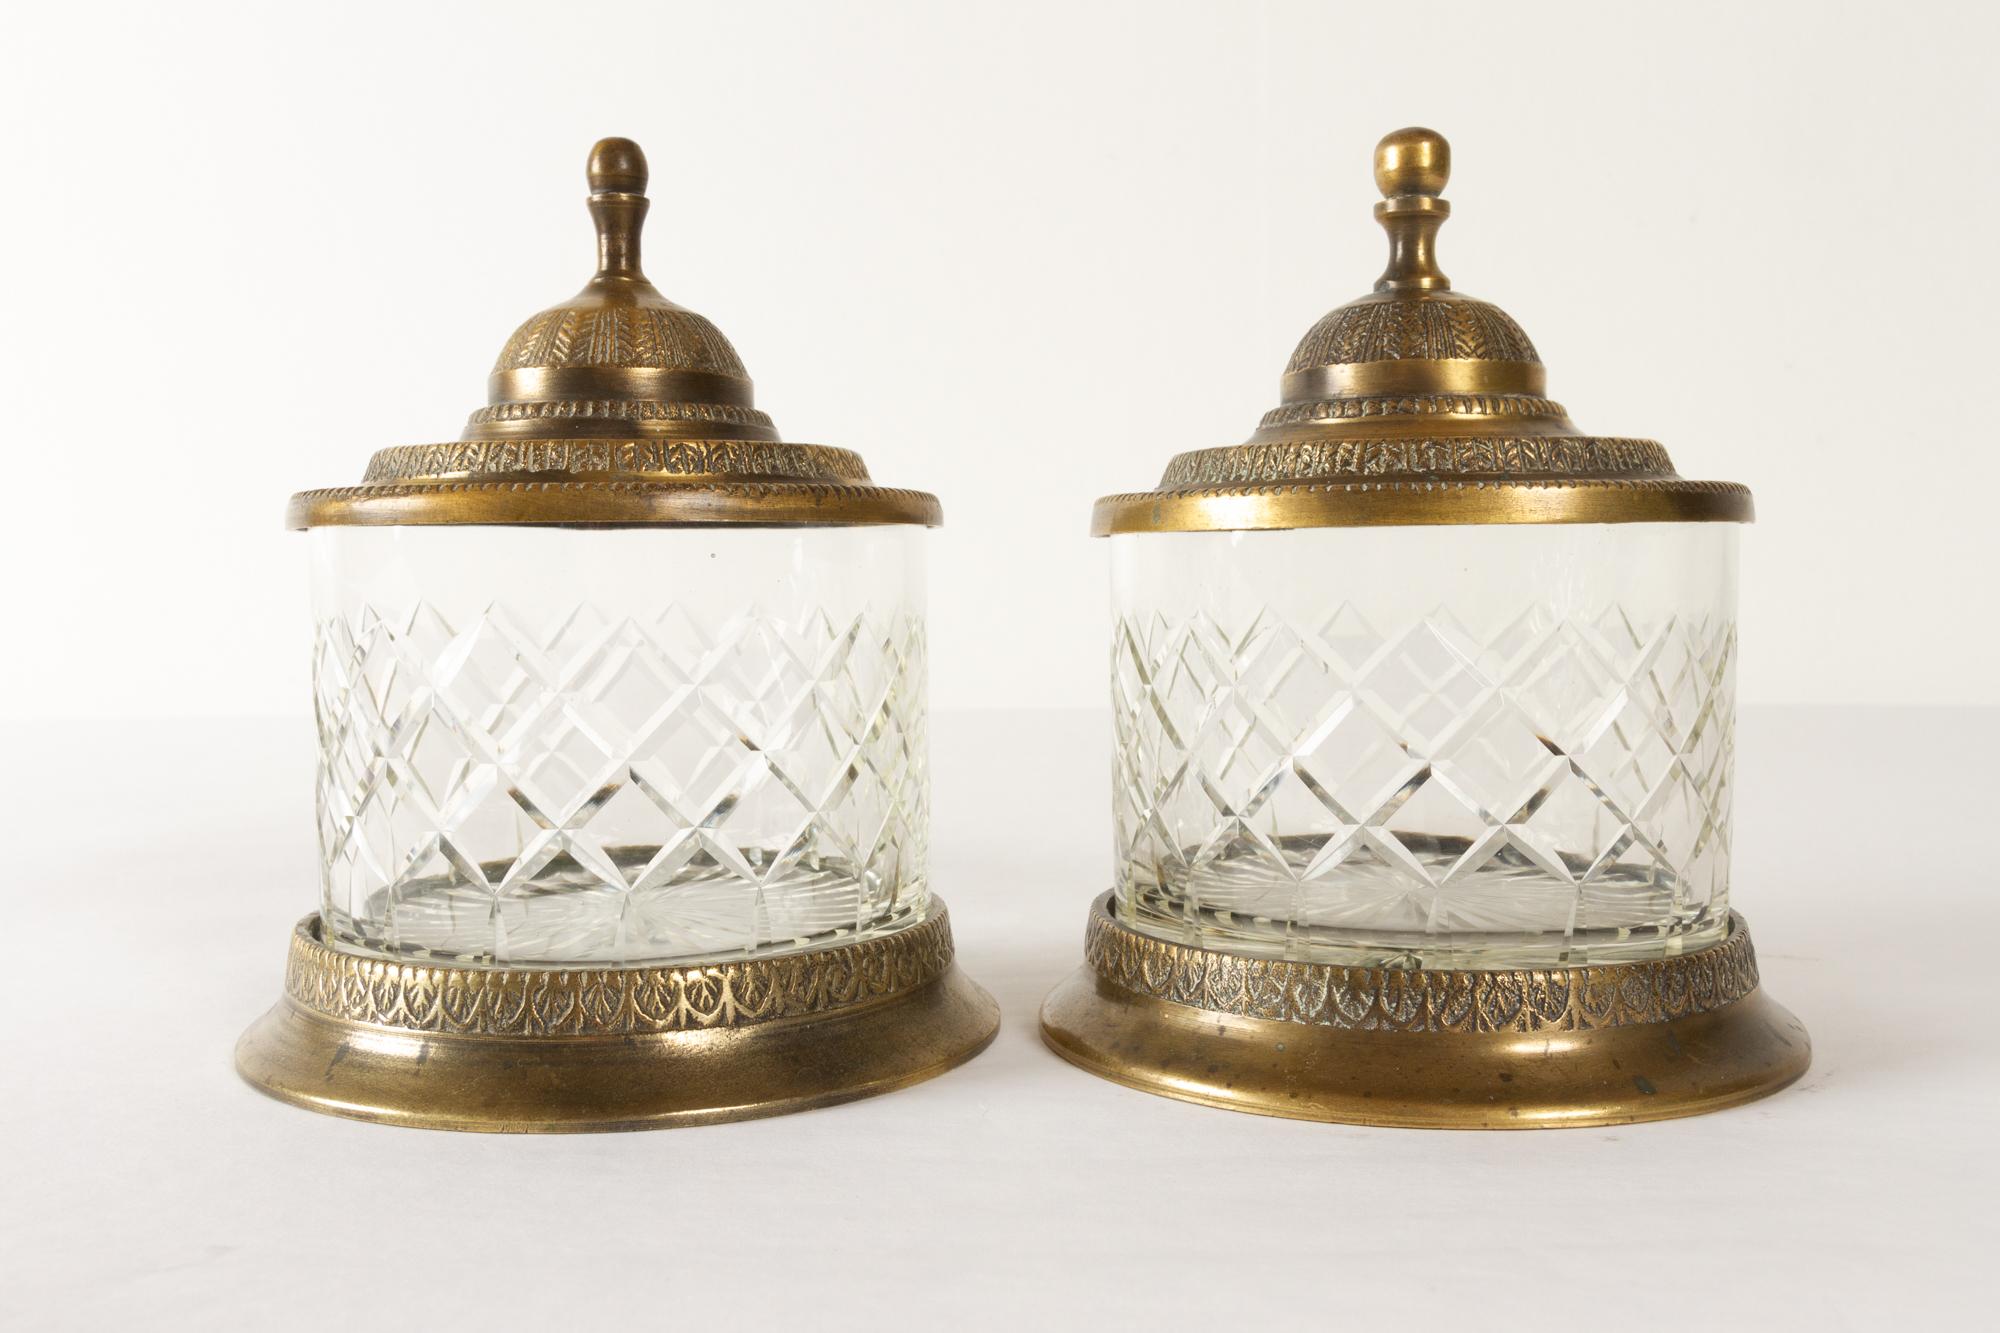 Antique crystal and bronze jars 19th century.
Rare pair of vanity or dresser jars in cut crystal with bronze lid and base. Lid and stands are decorated with a fine pattern. Probably French from late 19th century. 
Very good condition. No chips or